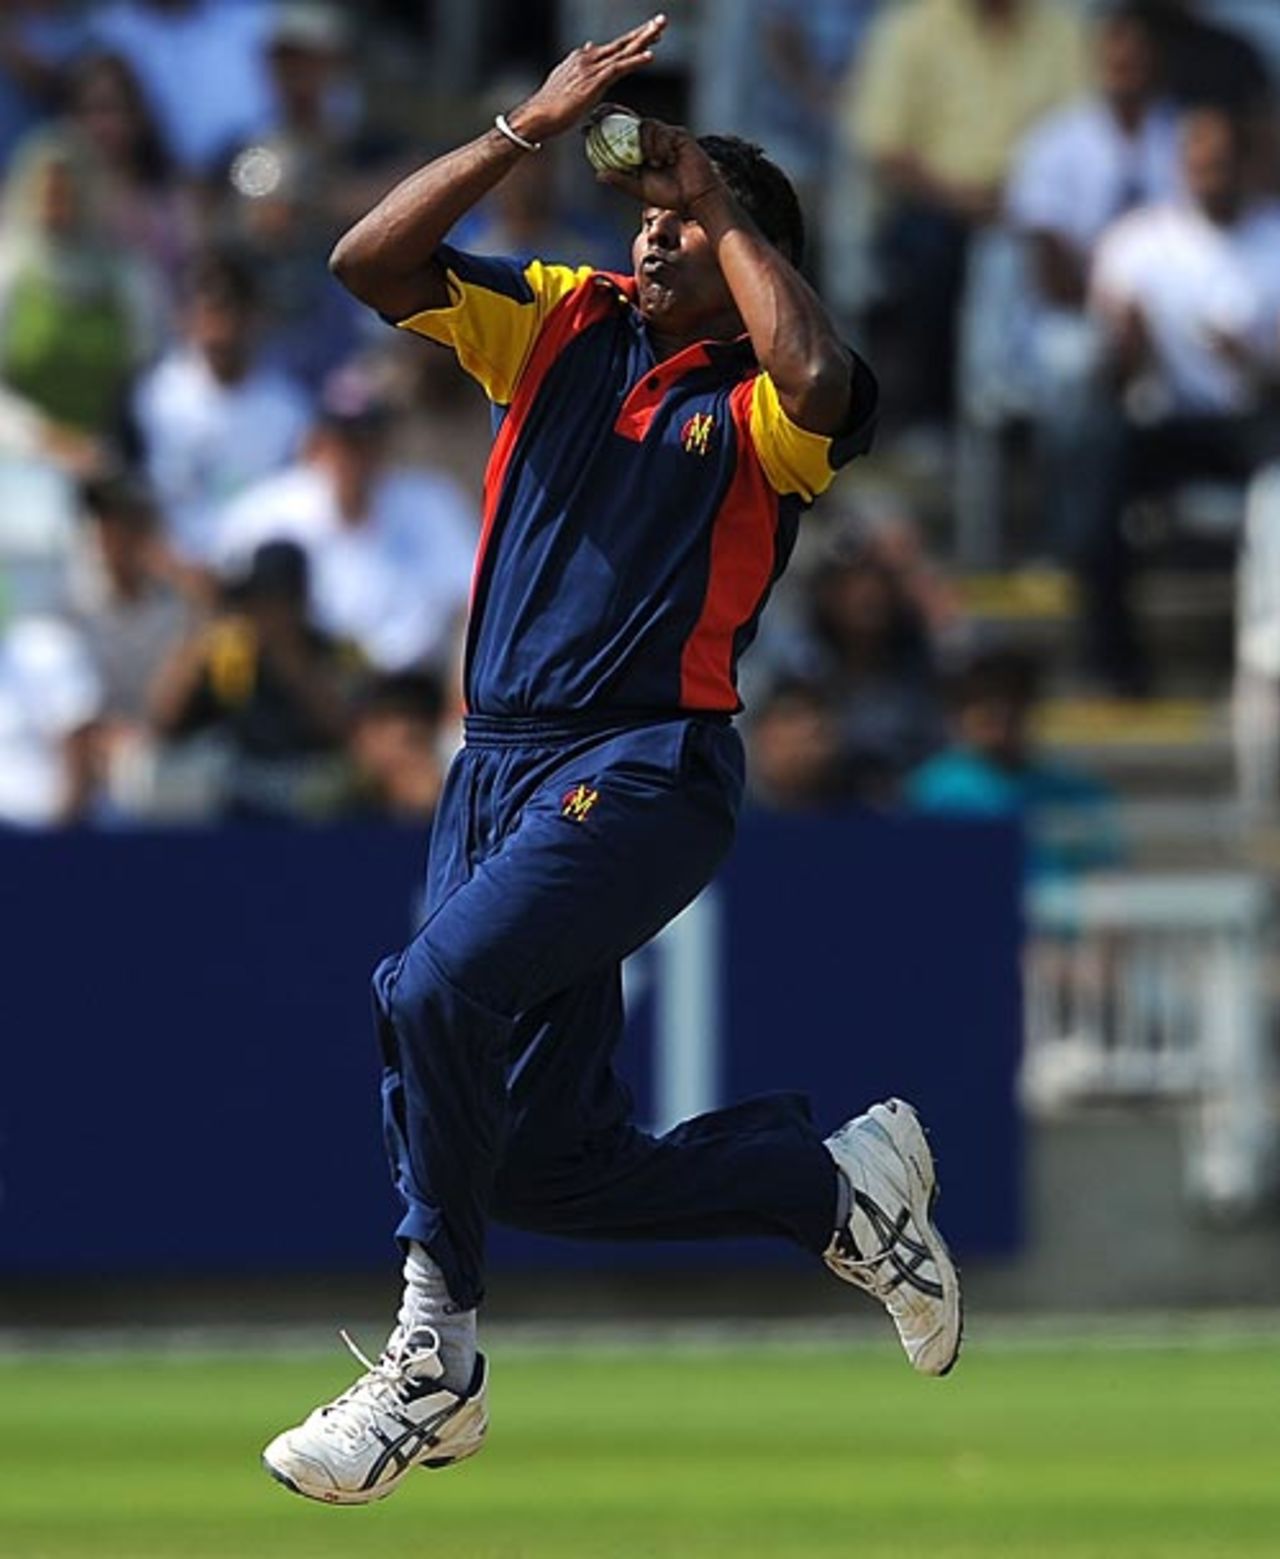 Chaminda Vaas hides the ball in delivery stride, MCC v Pakistan XI, Twenty20, Lord's, June 27, 2010